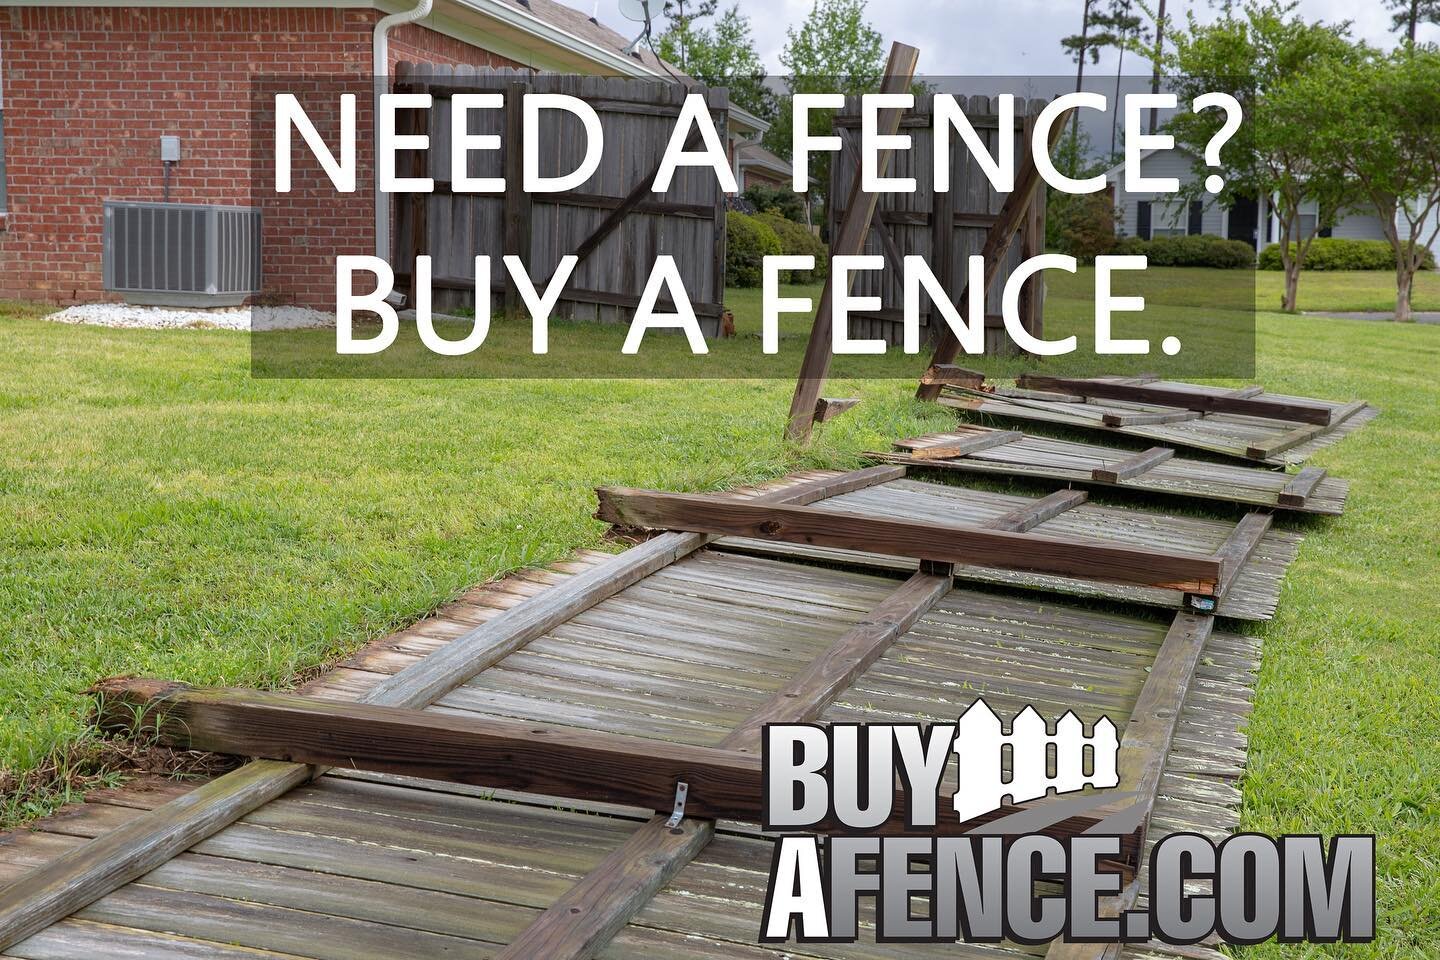 We see this all too often!
.
Strong winds taking down fences is common, but there are ways to prevent it.
.
Talk to a sales rep today to learn how we can build your next fence to stay upright during the next storm.